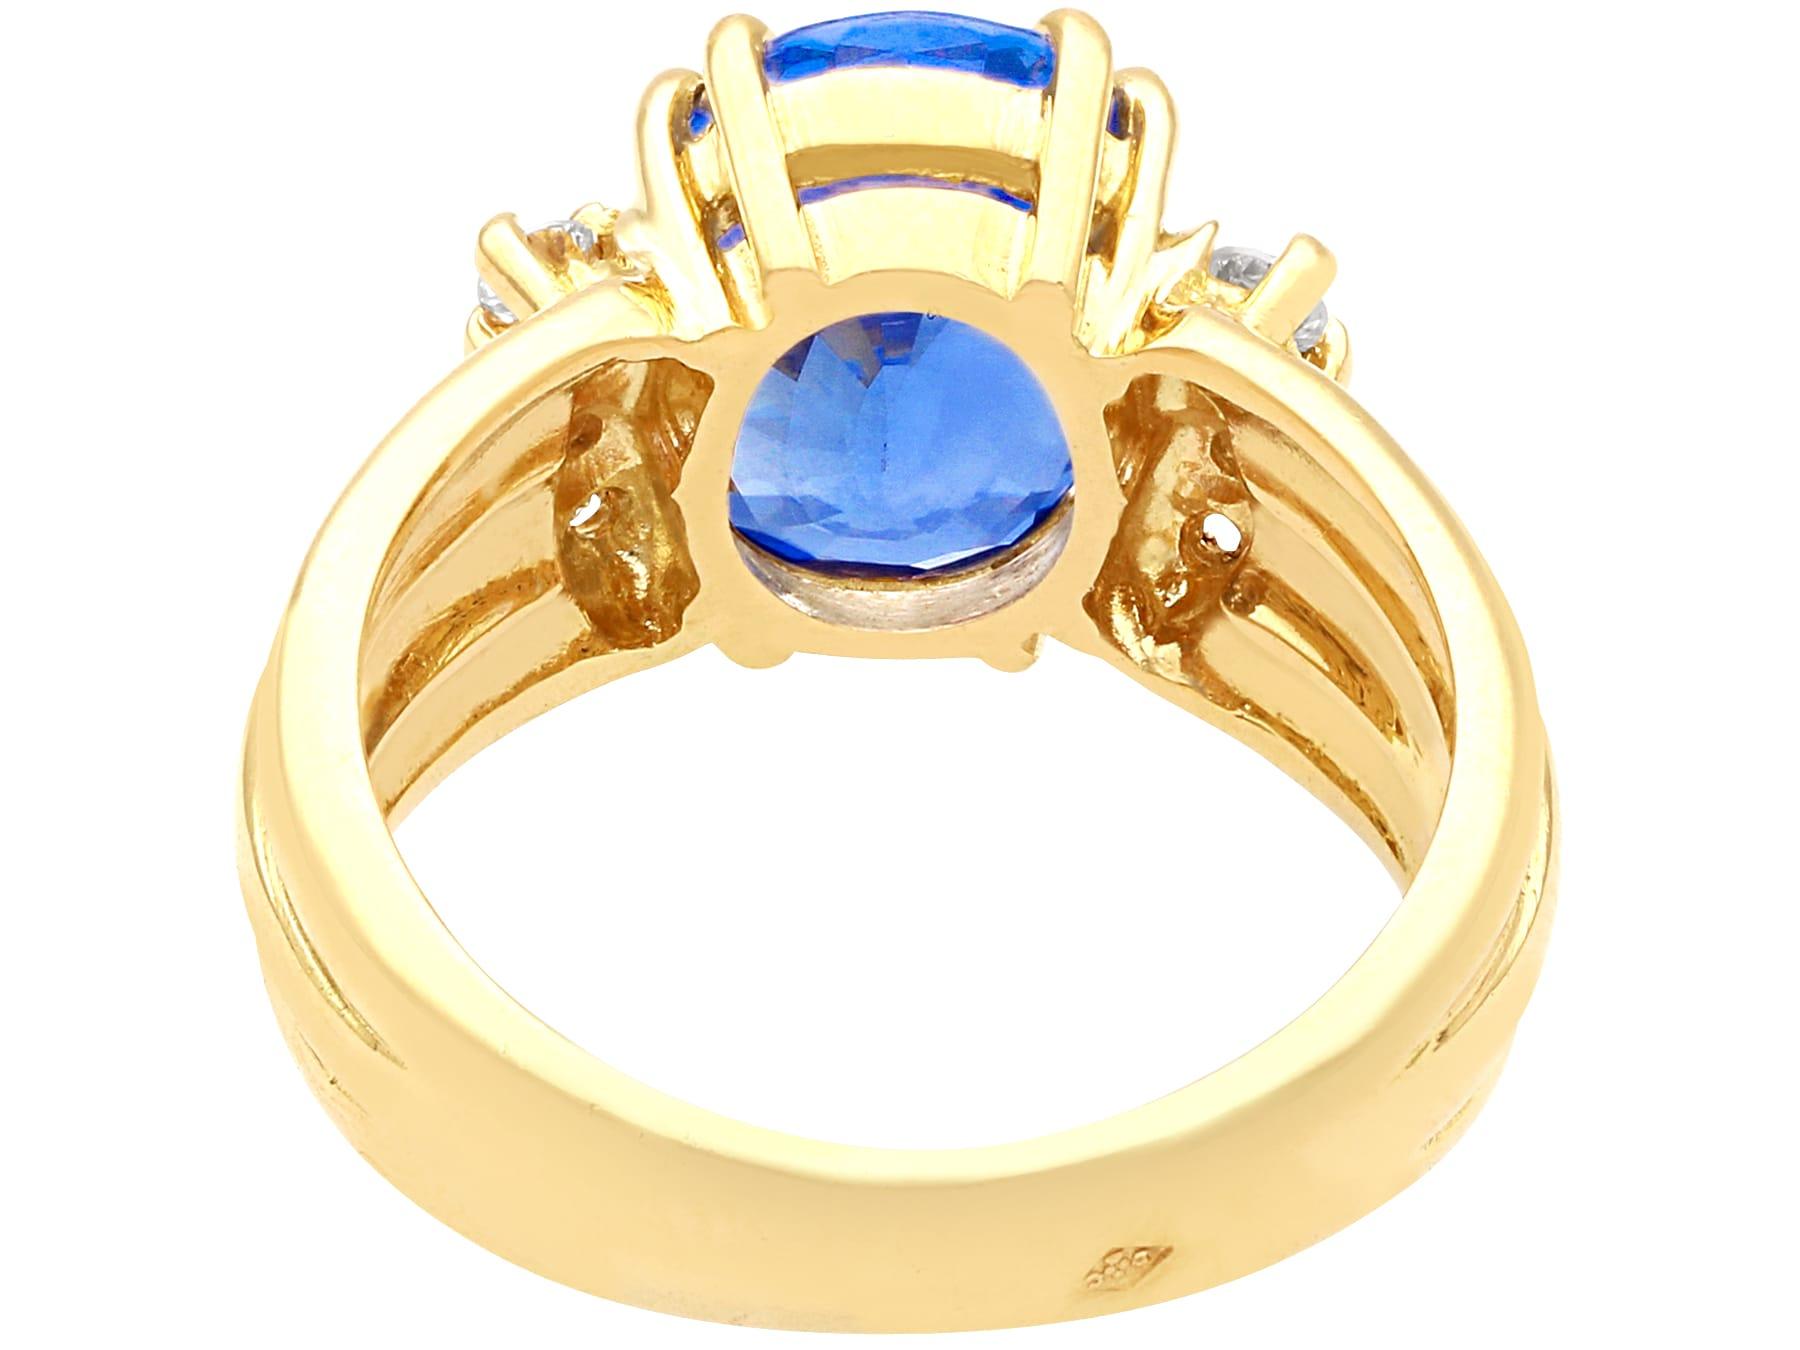 4.80 Carat Sapphire and Diamond Yellow Gold Cocktail Ring In Excellent Condition For Sale In Jesmond, Newcastle Upon Tyne